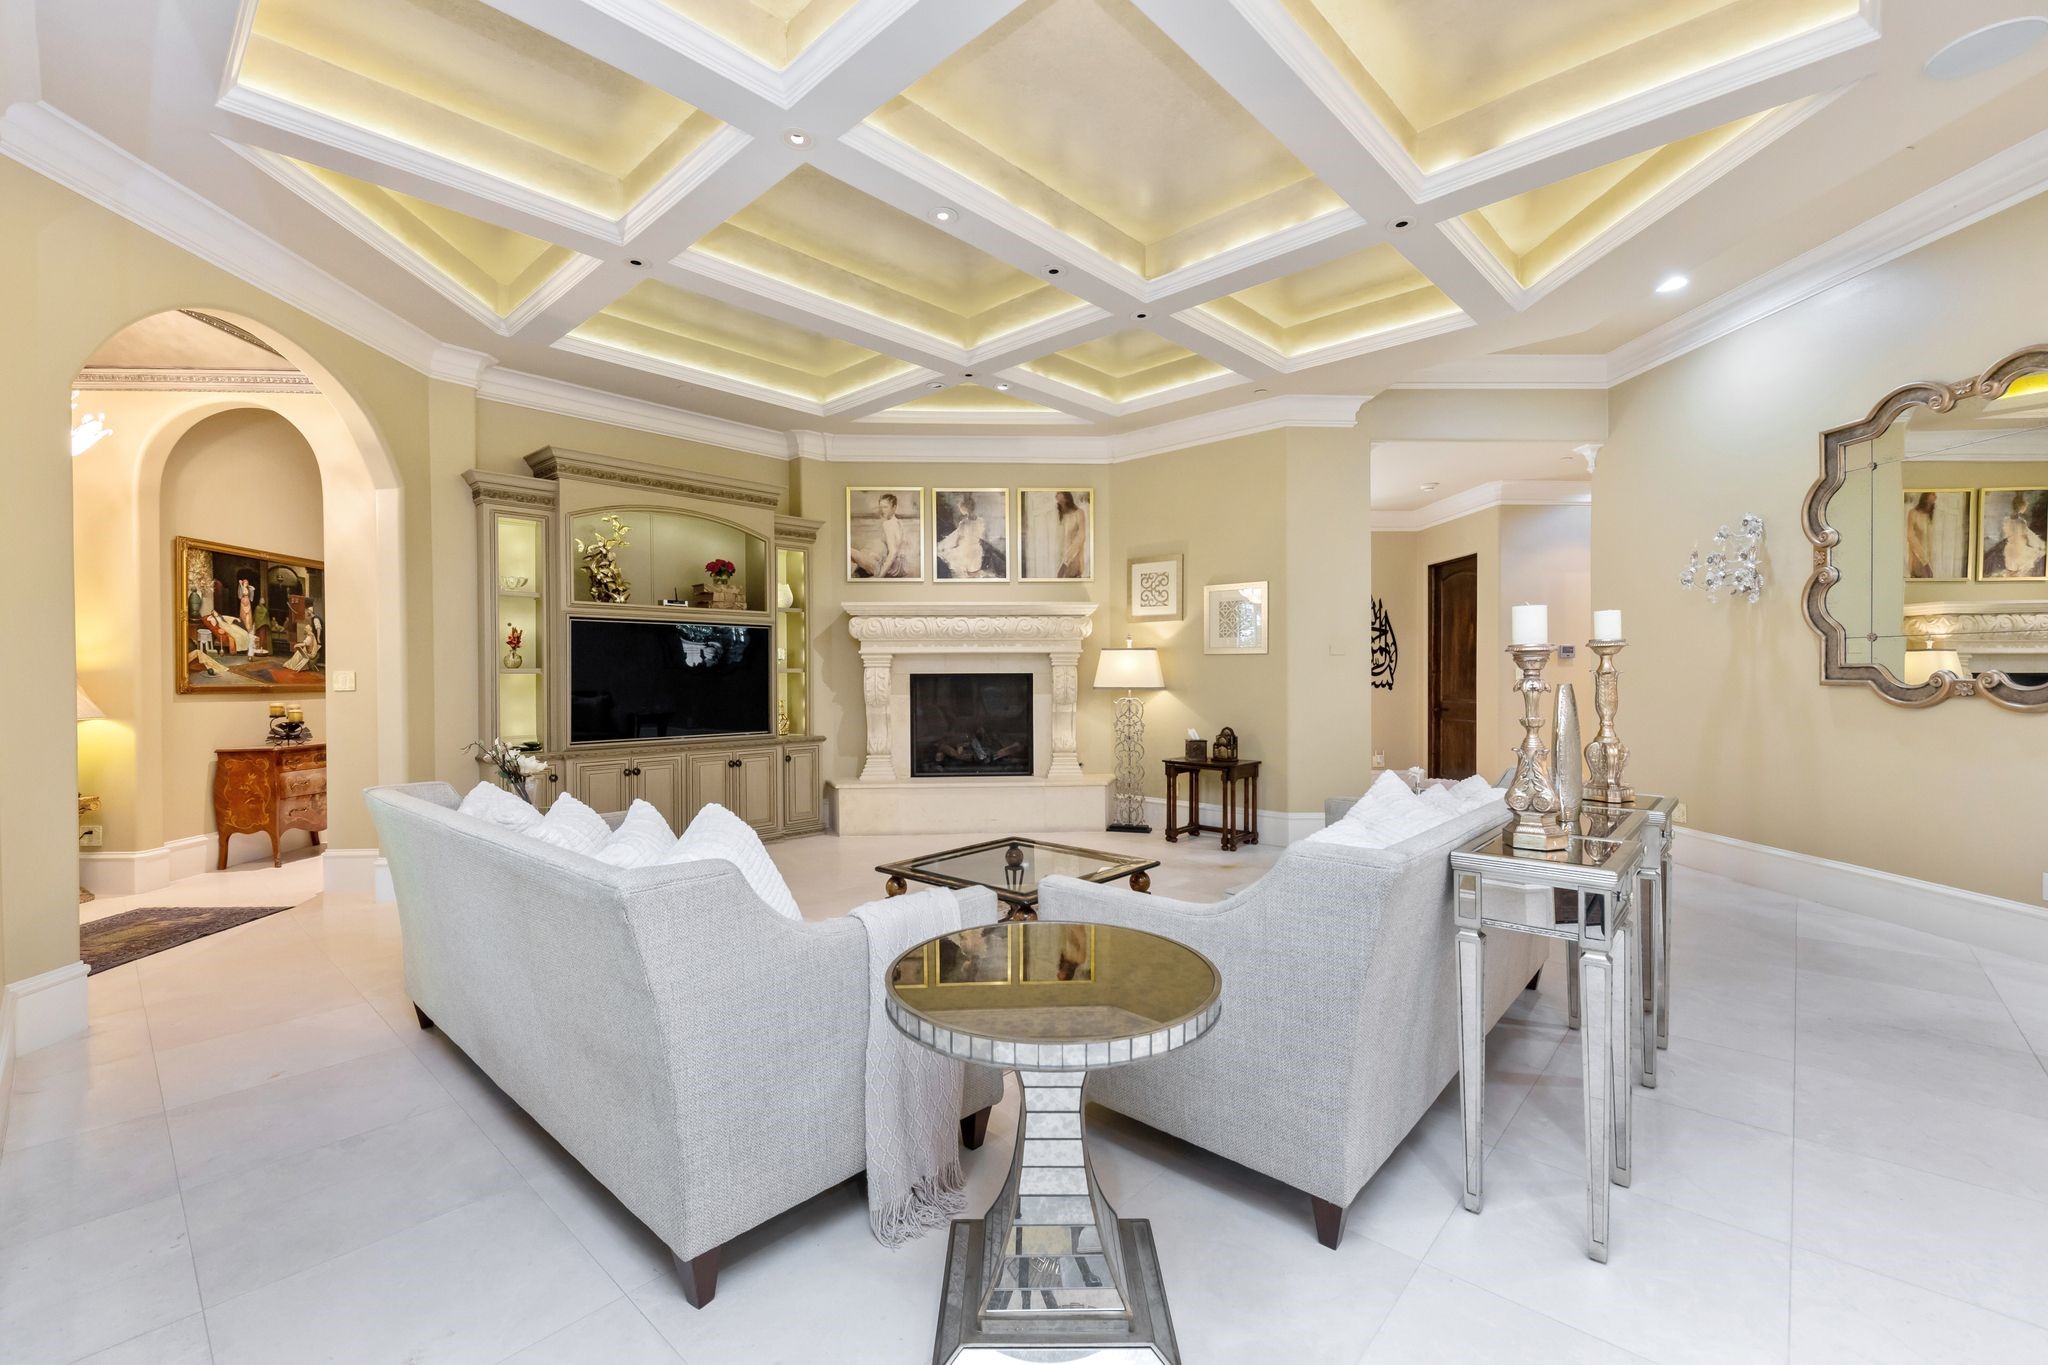 This lavish open concept family room features an impressive coffered ceiling, gas log fireplace with windows looking onto the warm and inviting covered veranda, which leads into the grand billiard room.